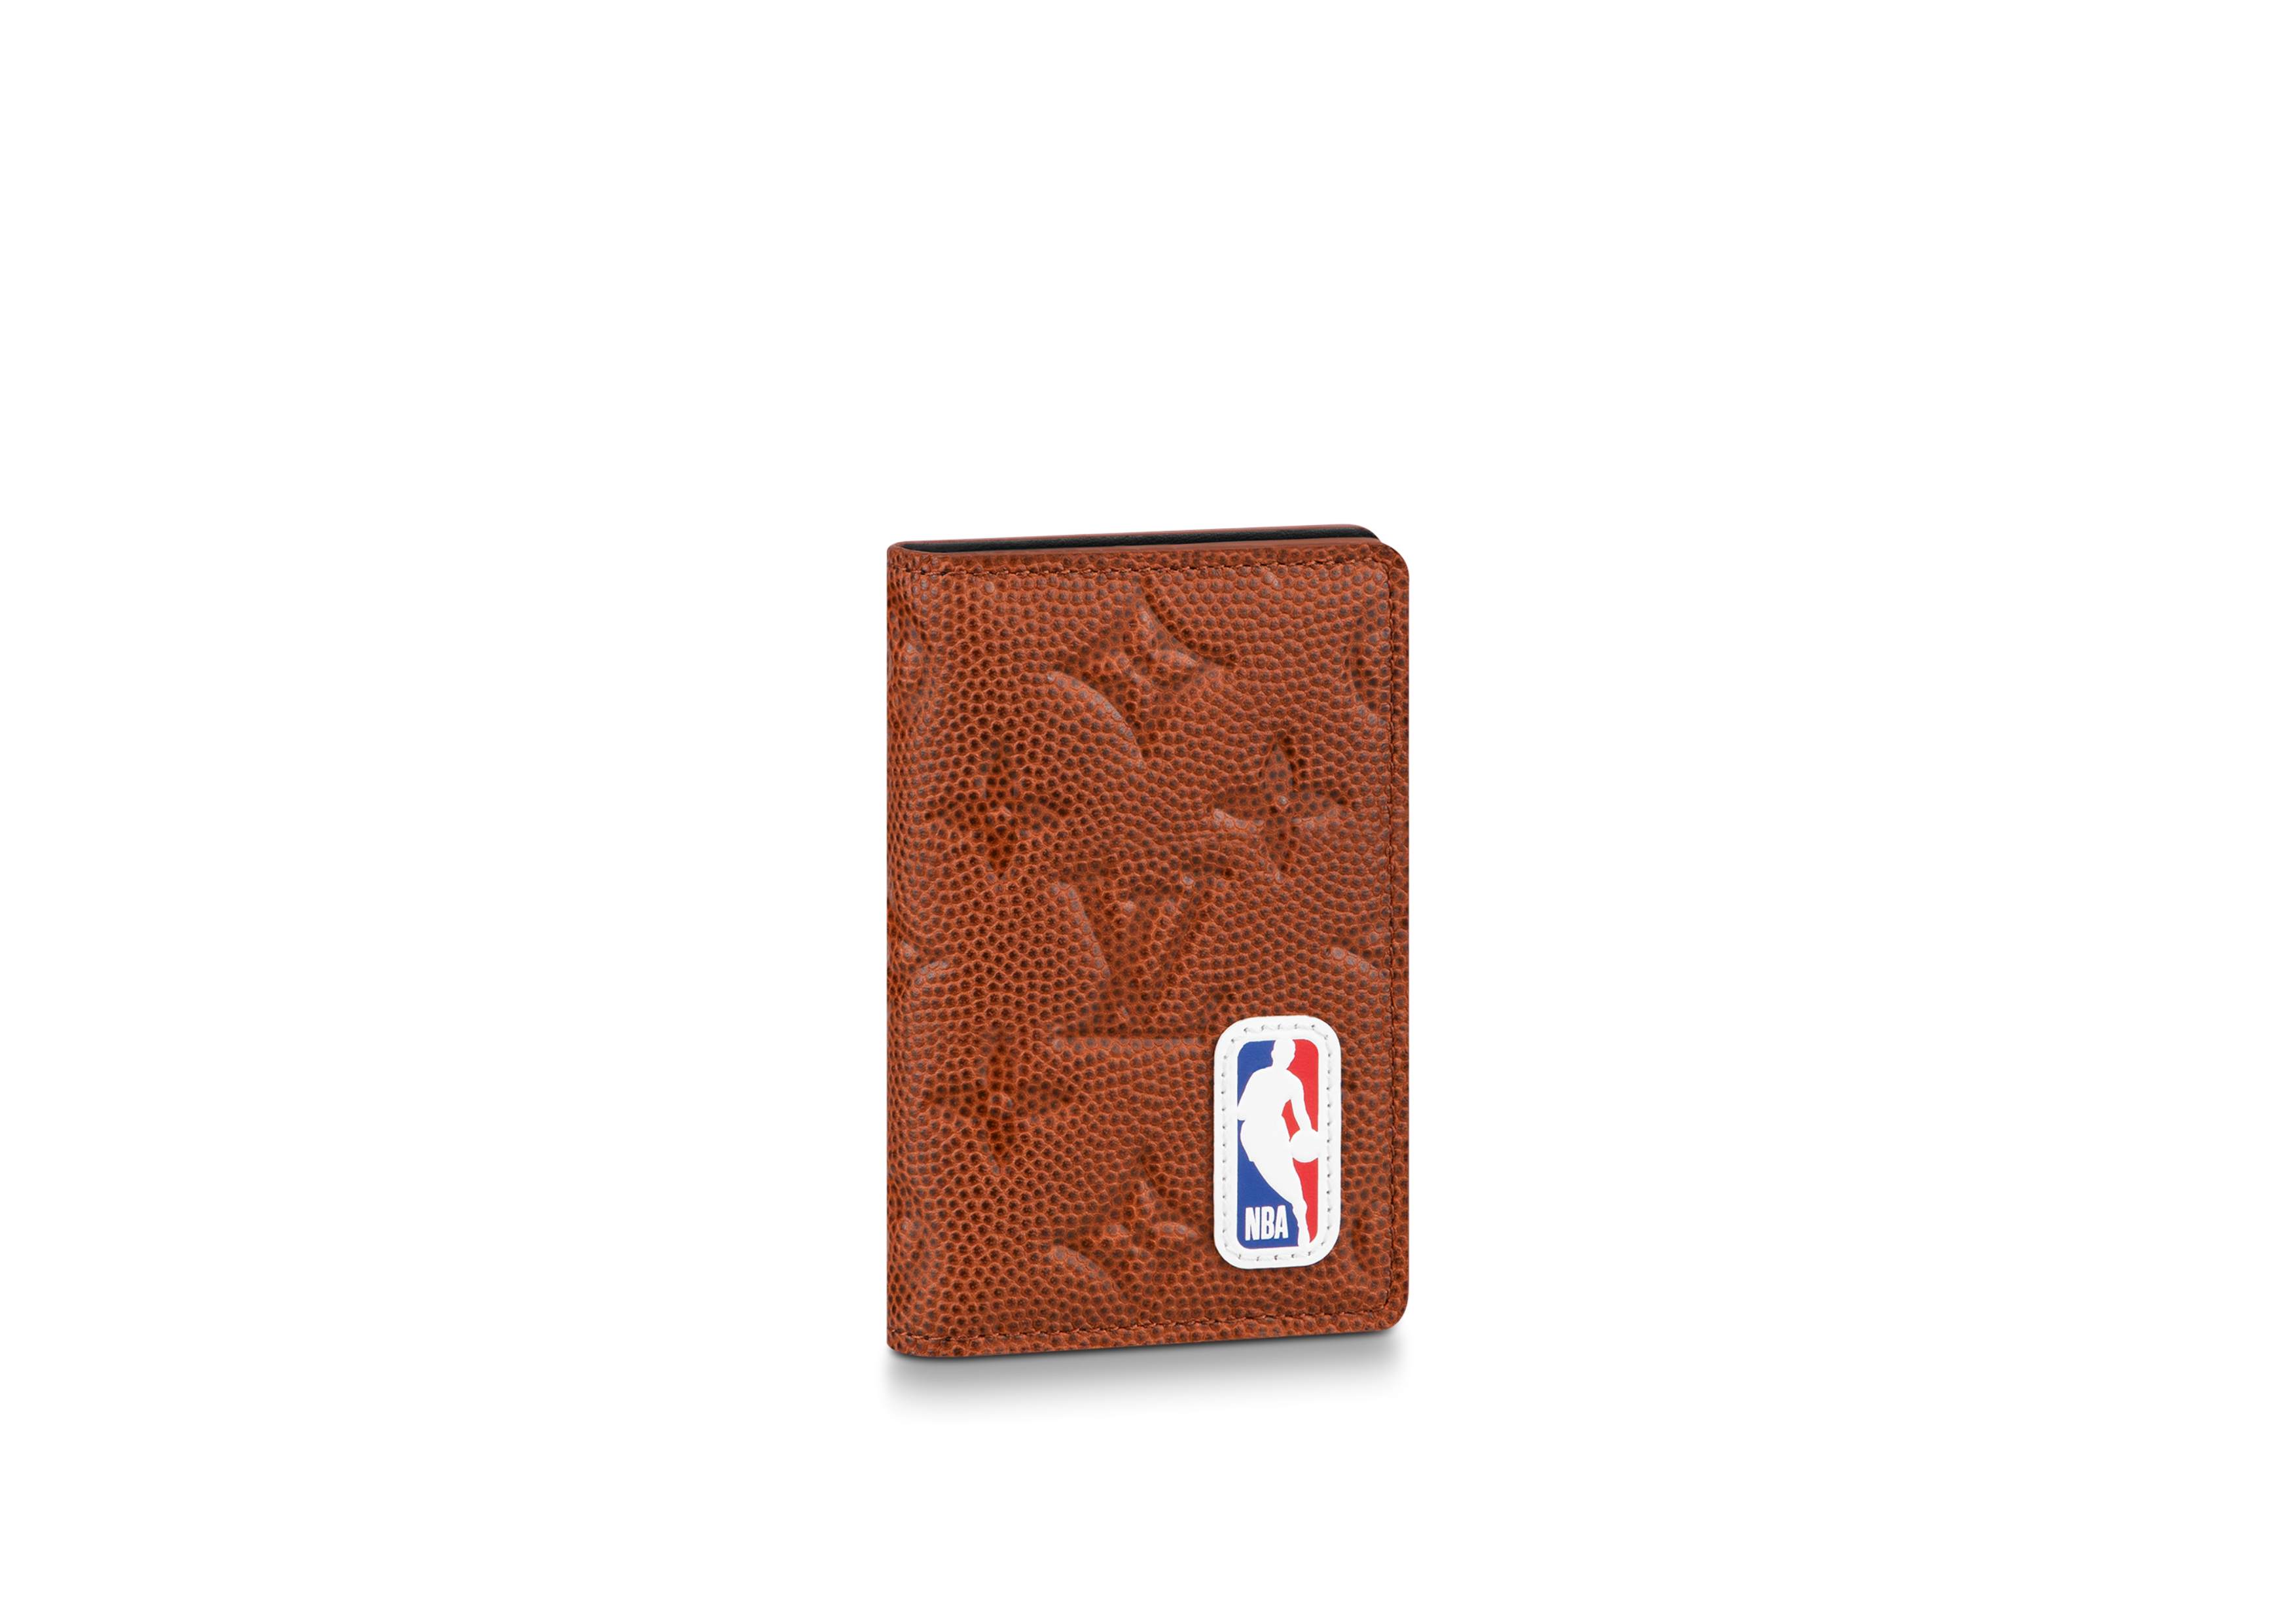 The second Louis Vuitton x NBA capsule collection is here